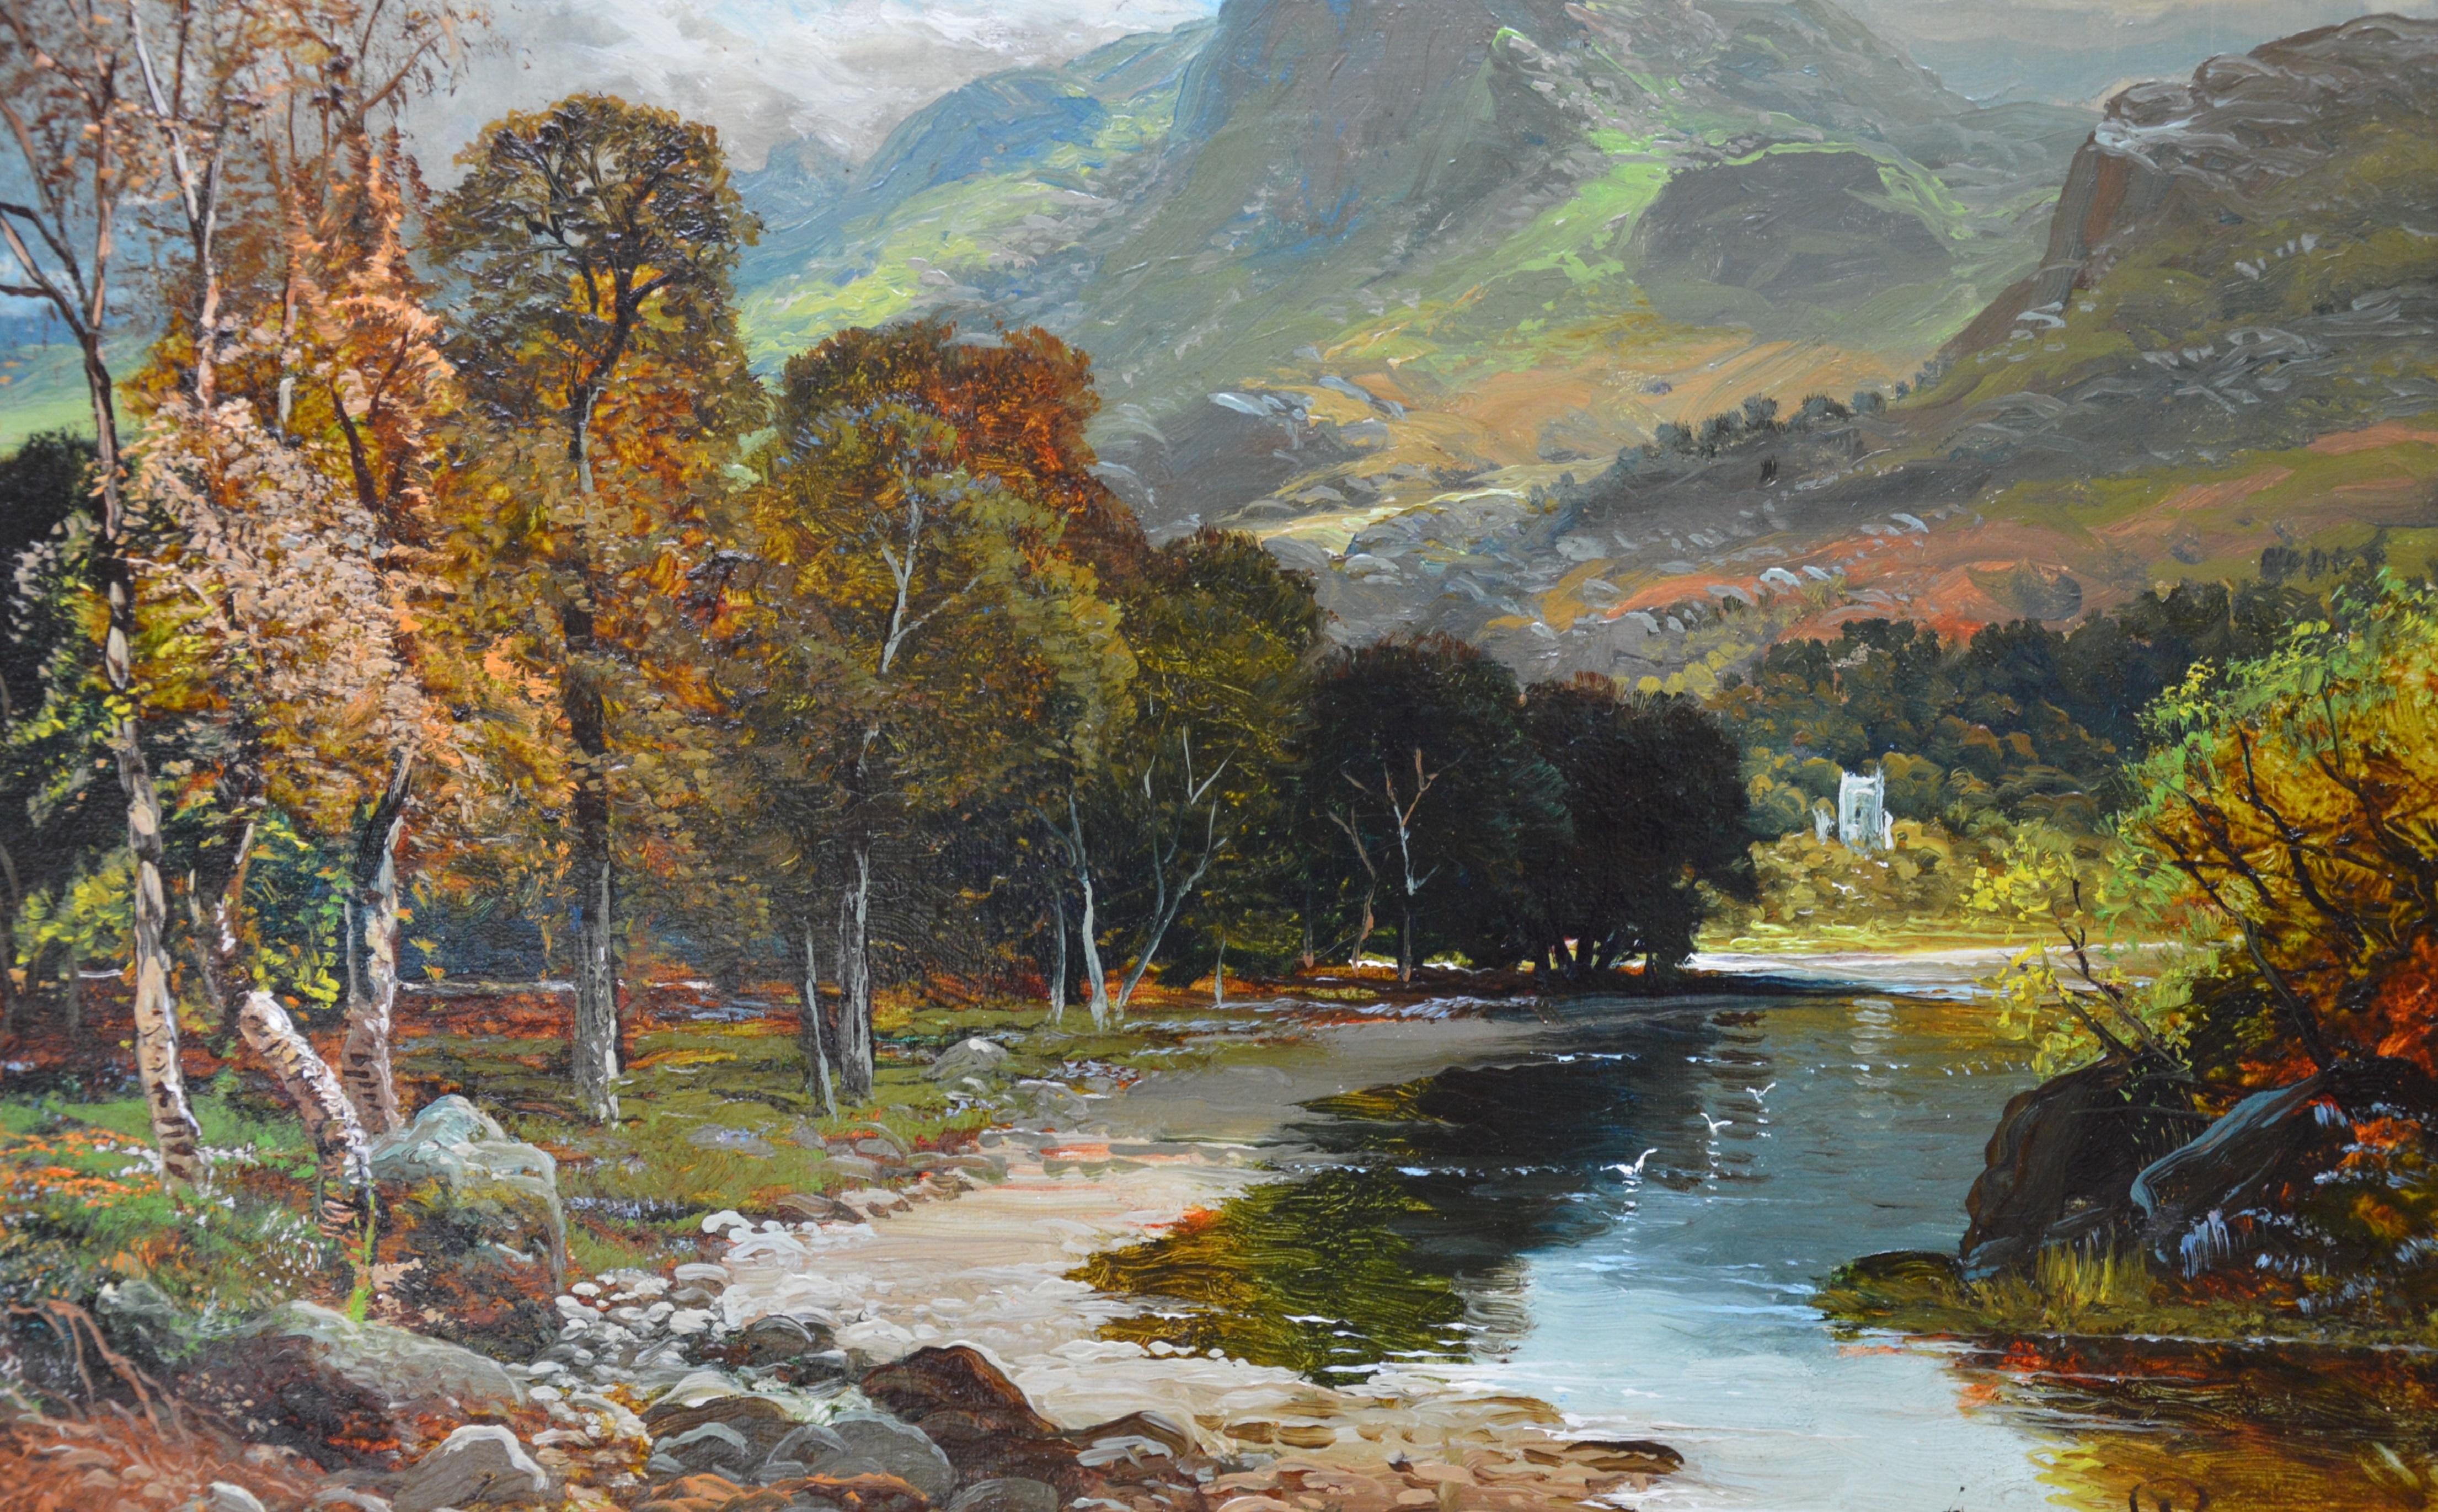 A fine 19th century oil on canvas depicting a magnificent late summer landscape at ‘Loch Katrine’ in the Scottish Highlands by the renowned Victorian landscape painter Clarence Henry Roe (1850-1909). The painting is signed by the artist and sold in